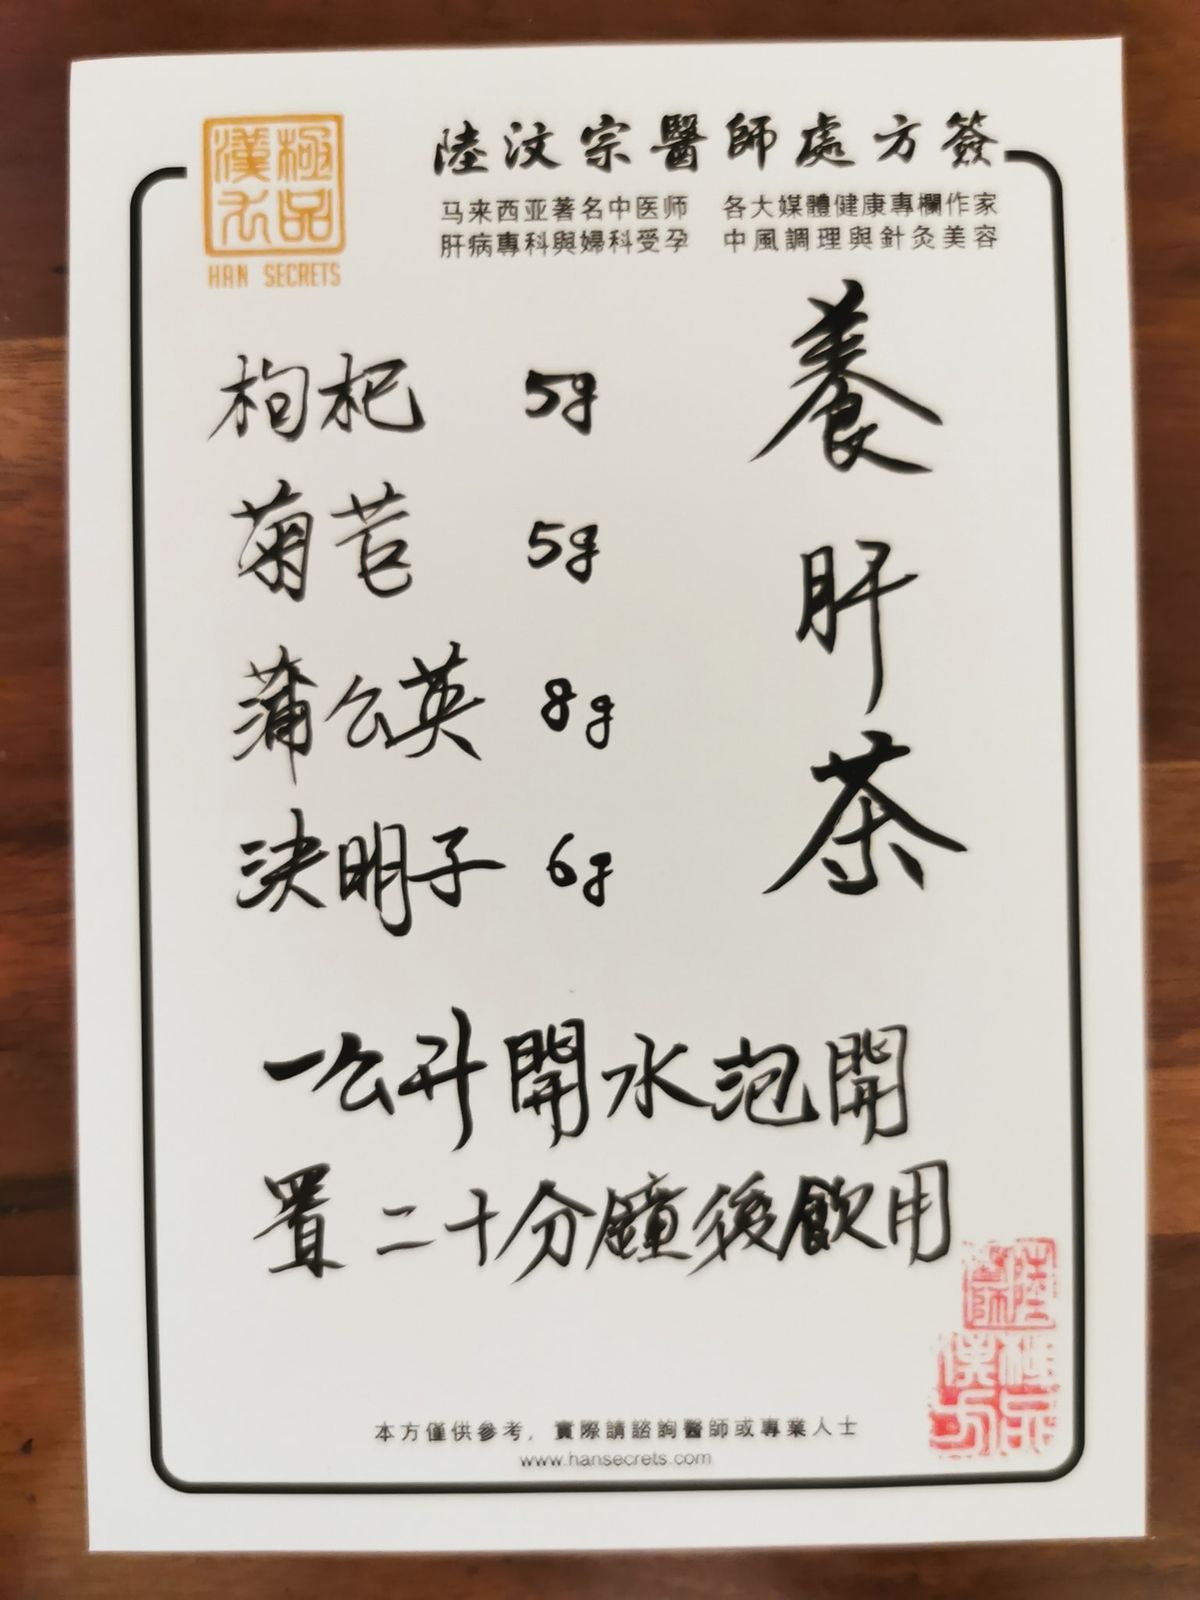 Recipe for Liver Protection 《养肝茶》